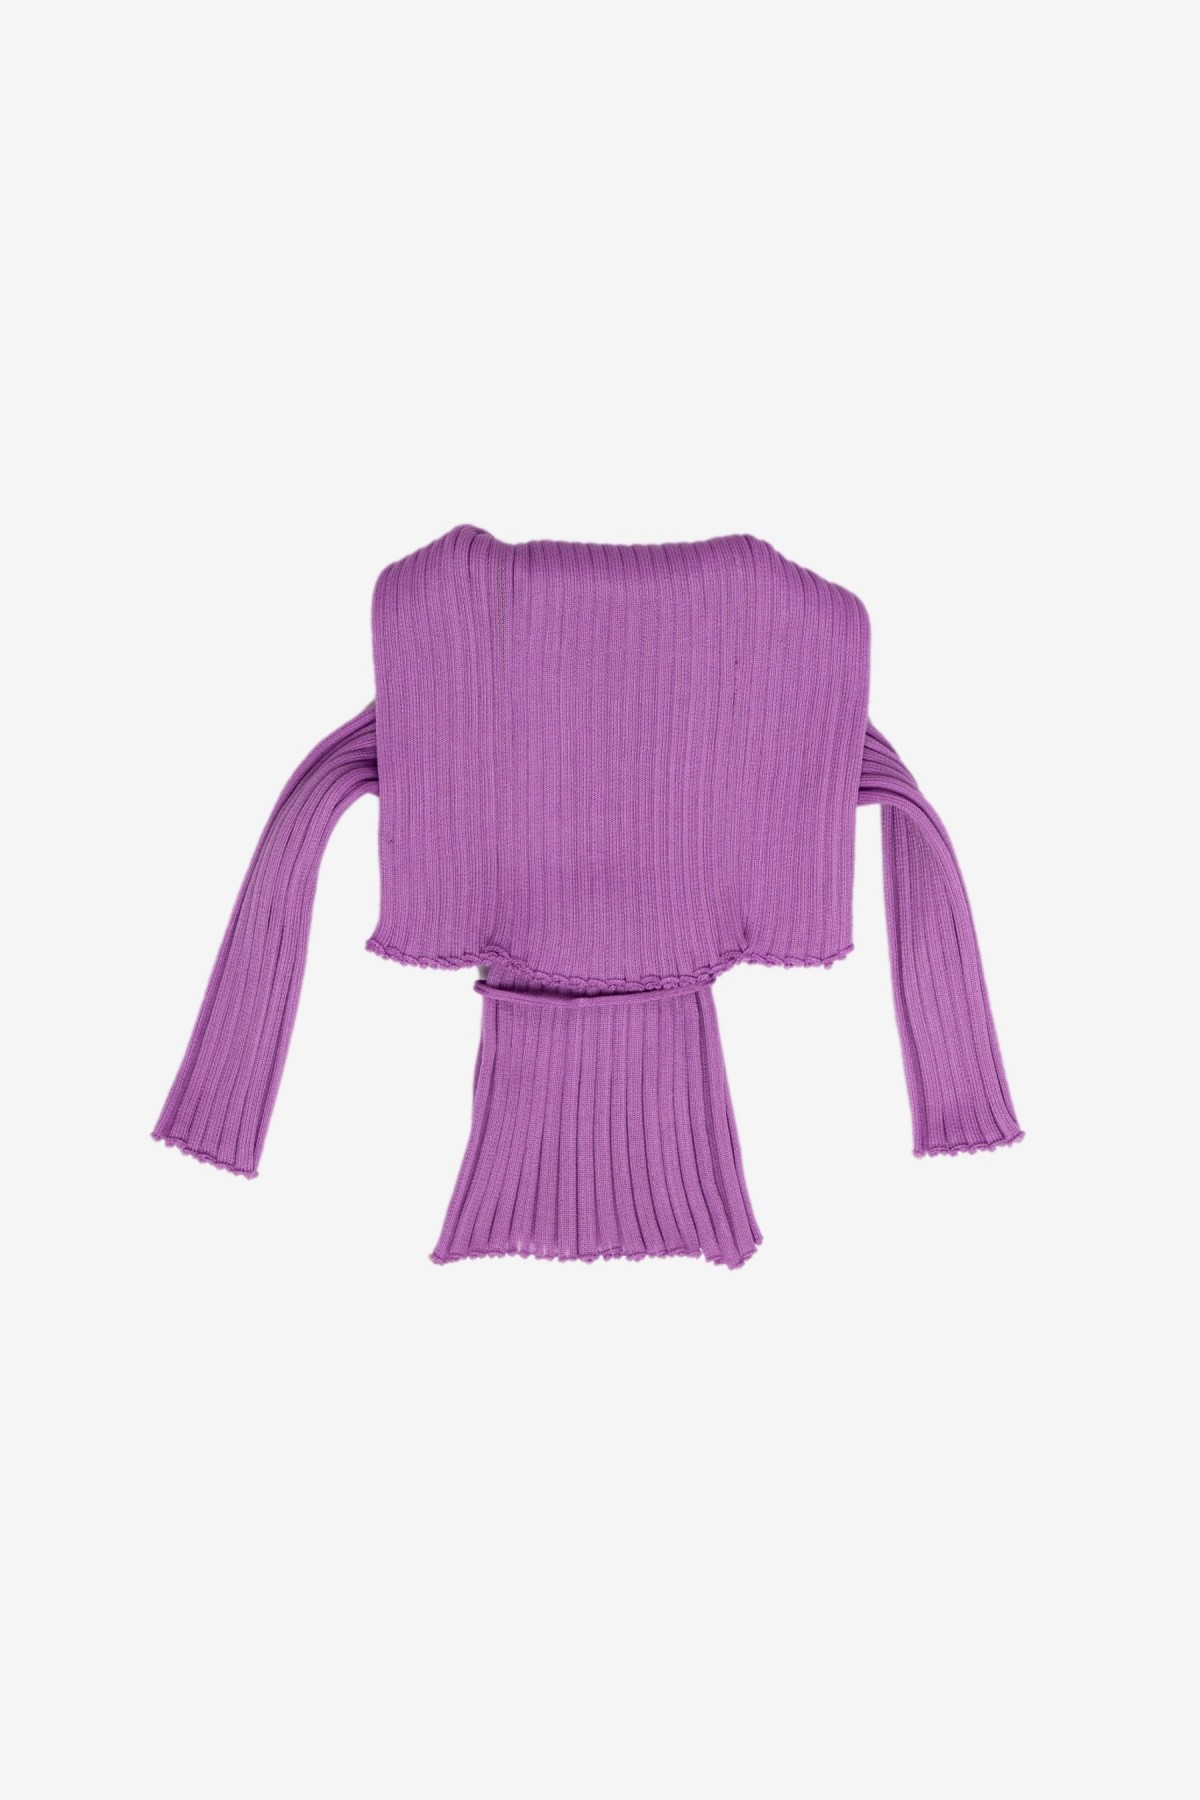 A. Roege Hove Ara Wide Collar Cardigan in Lilac